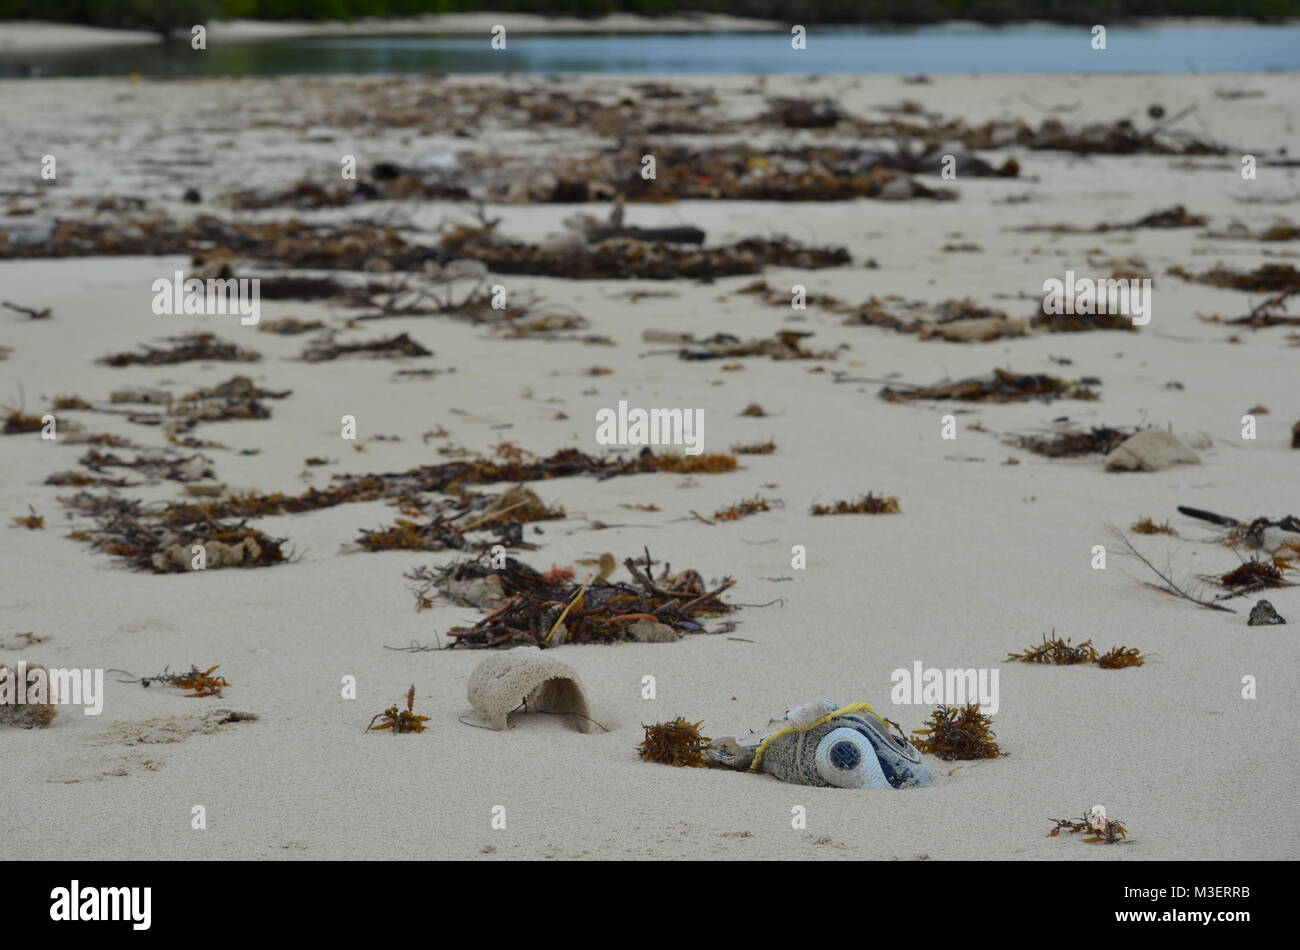 Garbage, plastic waste and heaps of dead marine plants and animals washed out on a beach in Cayo Coco Cuba after a destructive storm and hurricane. Stock Photo